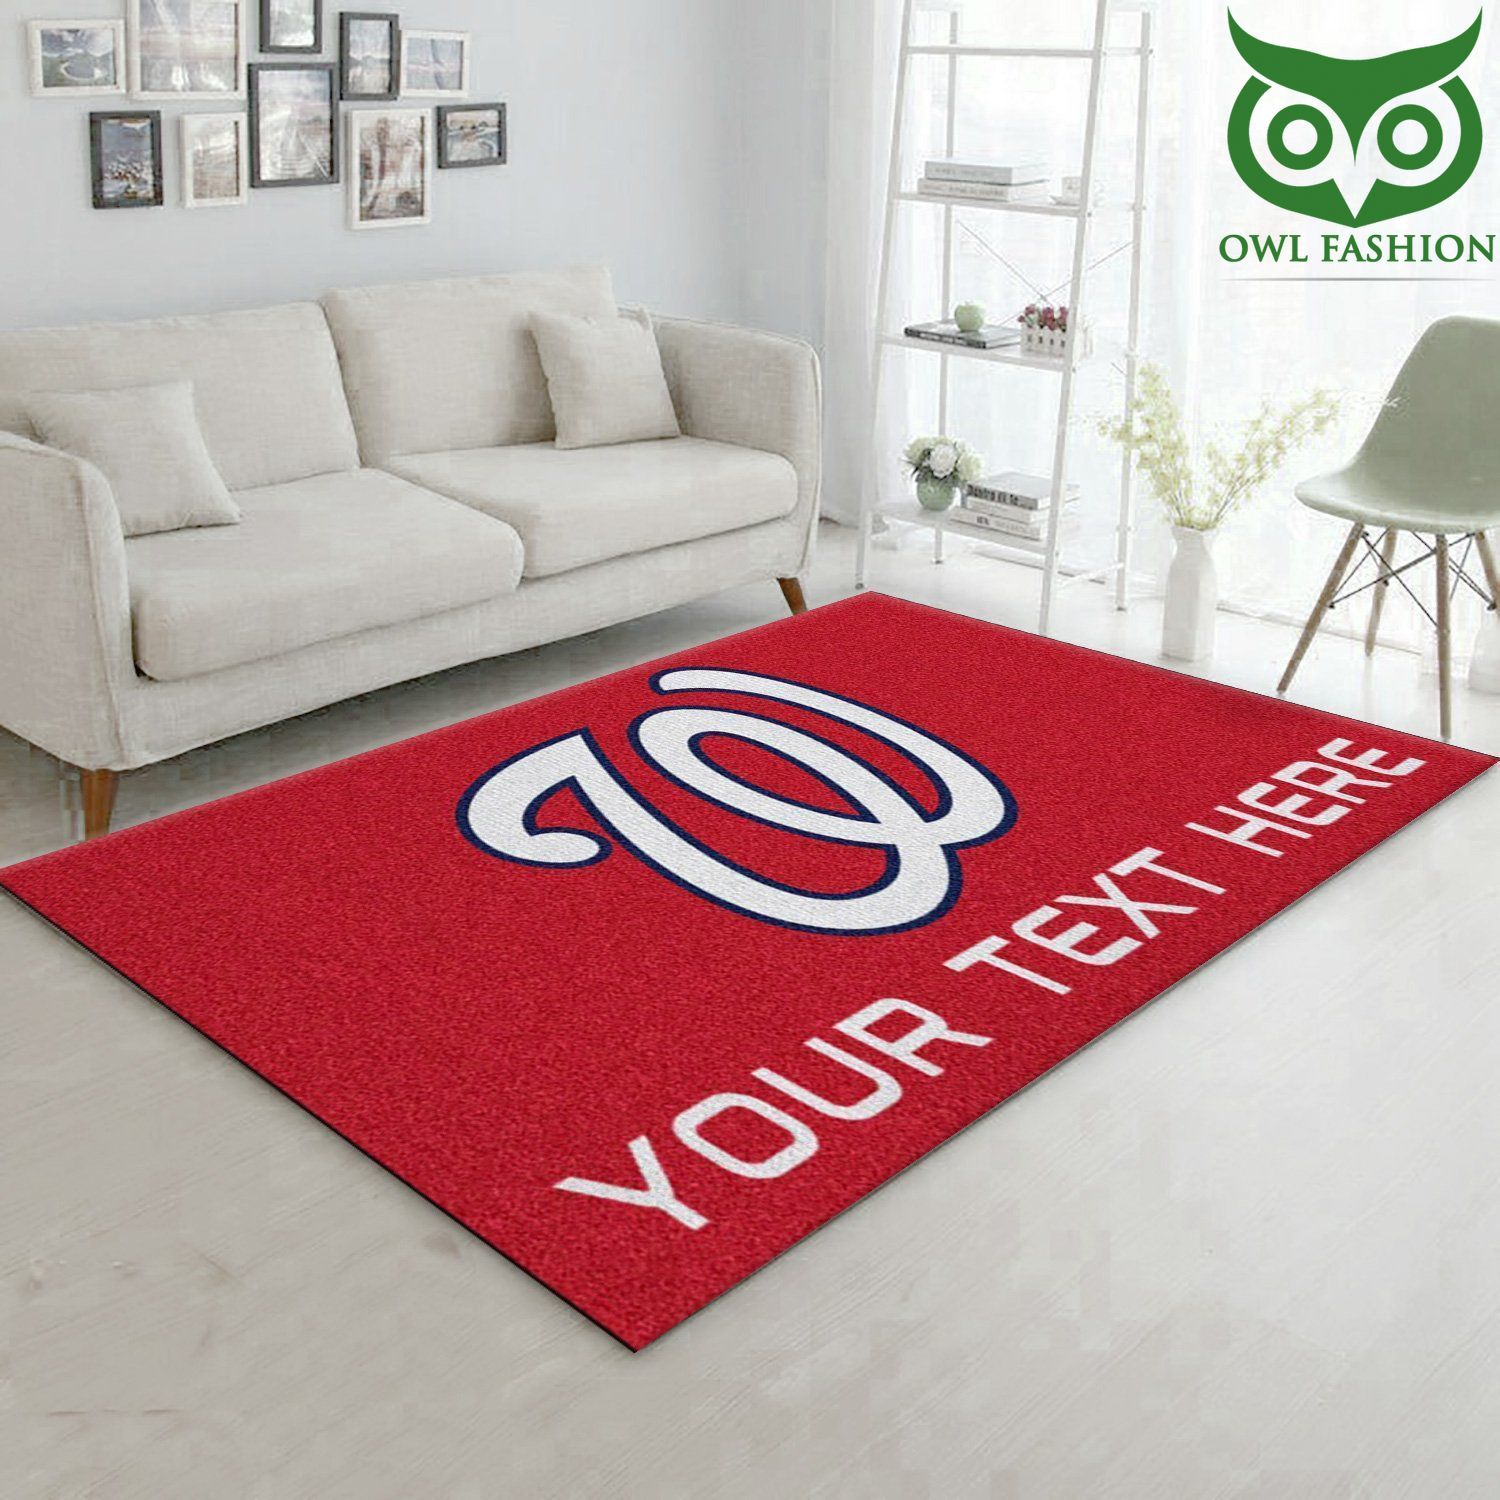 Customizable Personalized Accent MLB Carpet Rug